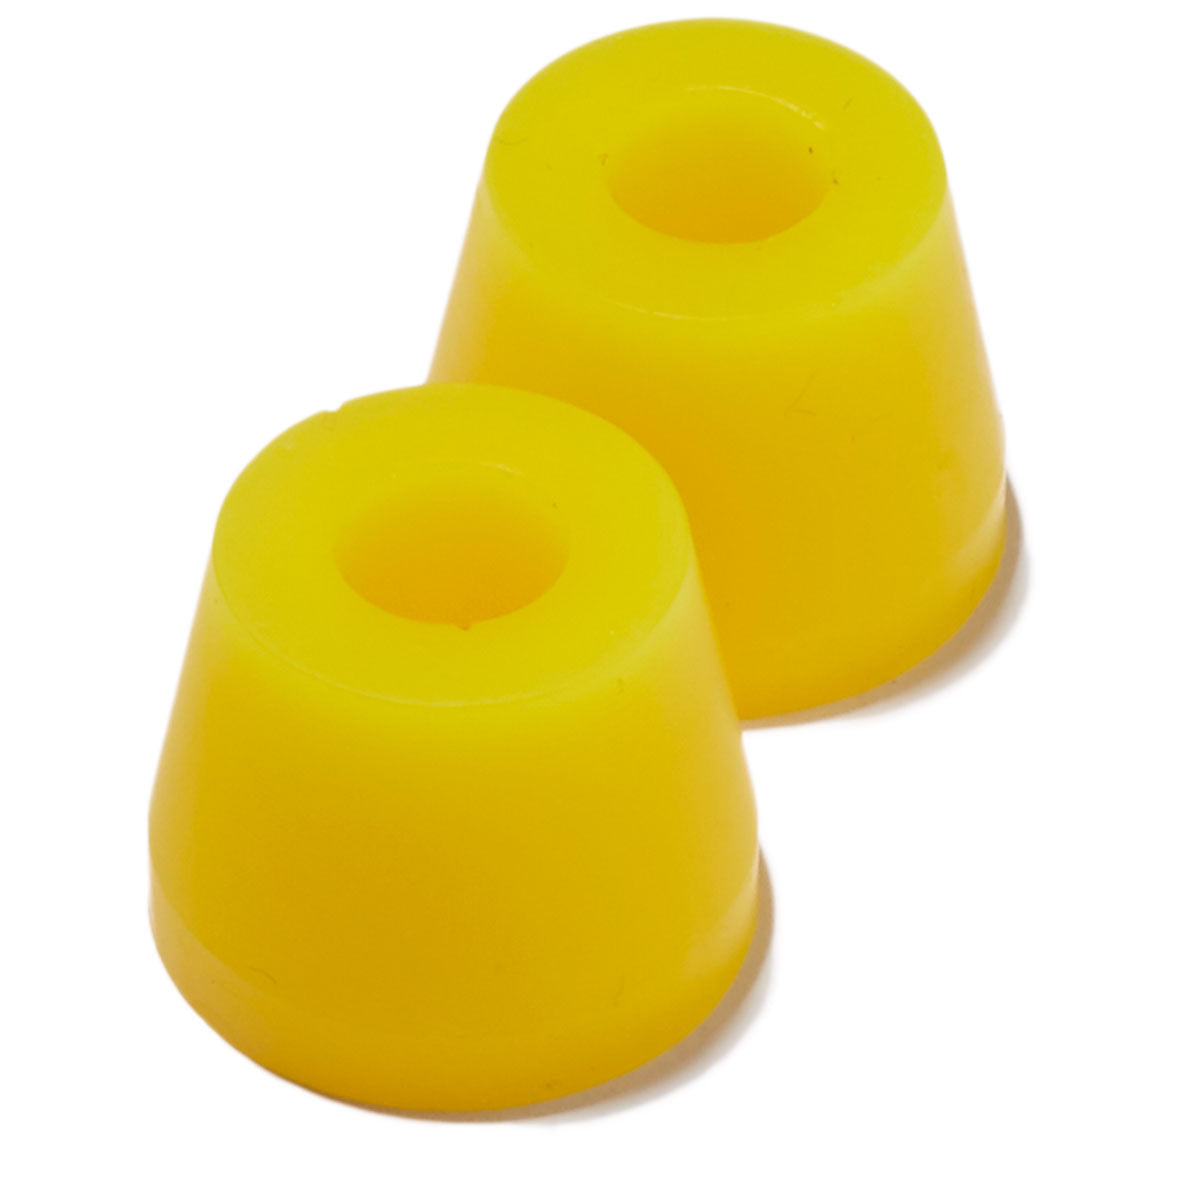 RipTide Tall Cone Bushings - APS 90a image 1